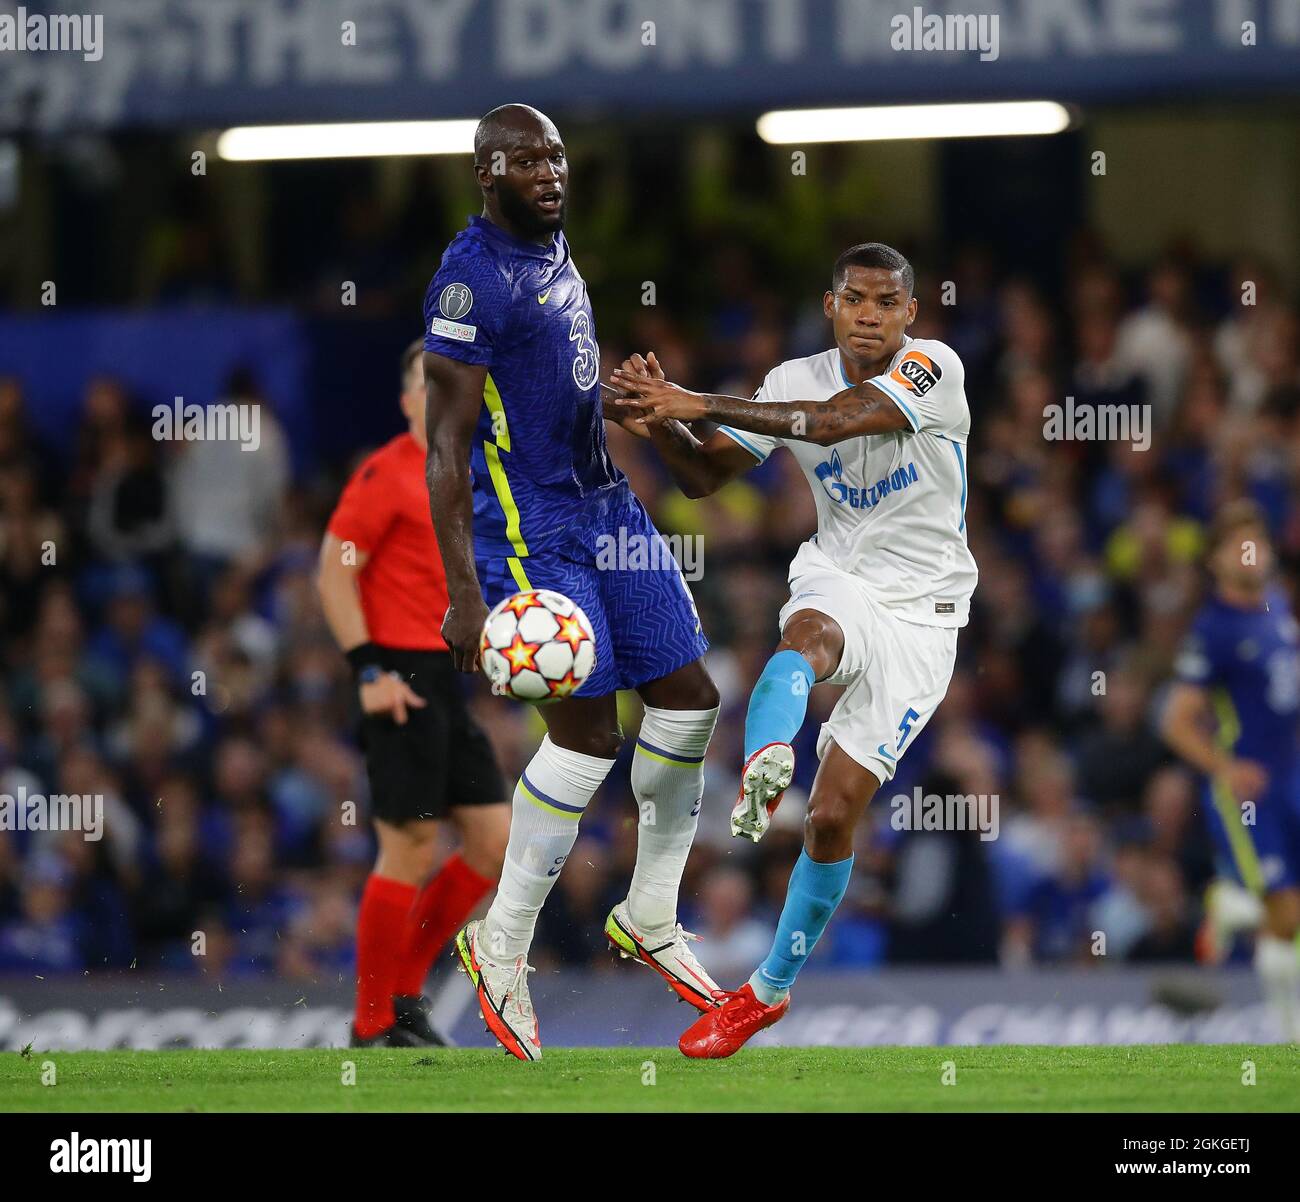 London, England, 14th September 2021. Romelu Lukaku of Chelsea with Wilmar Barrios of Zenit during the UEFA Champions League match at Stamford Bridge, London. Picture credit should read: David Klein / Sportimage Stock Photo